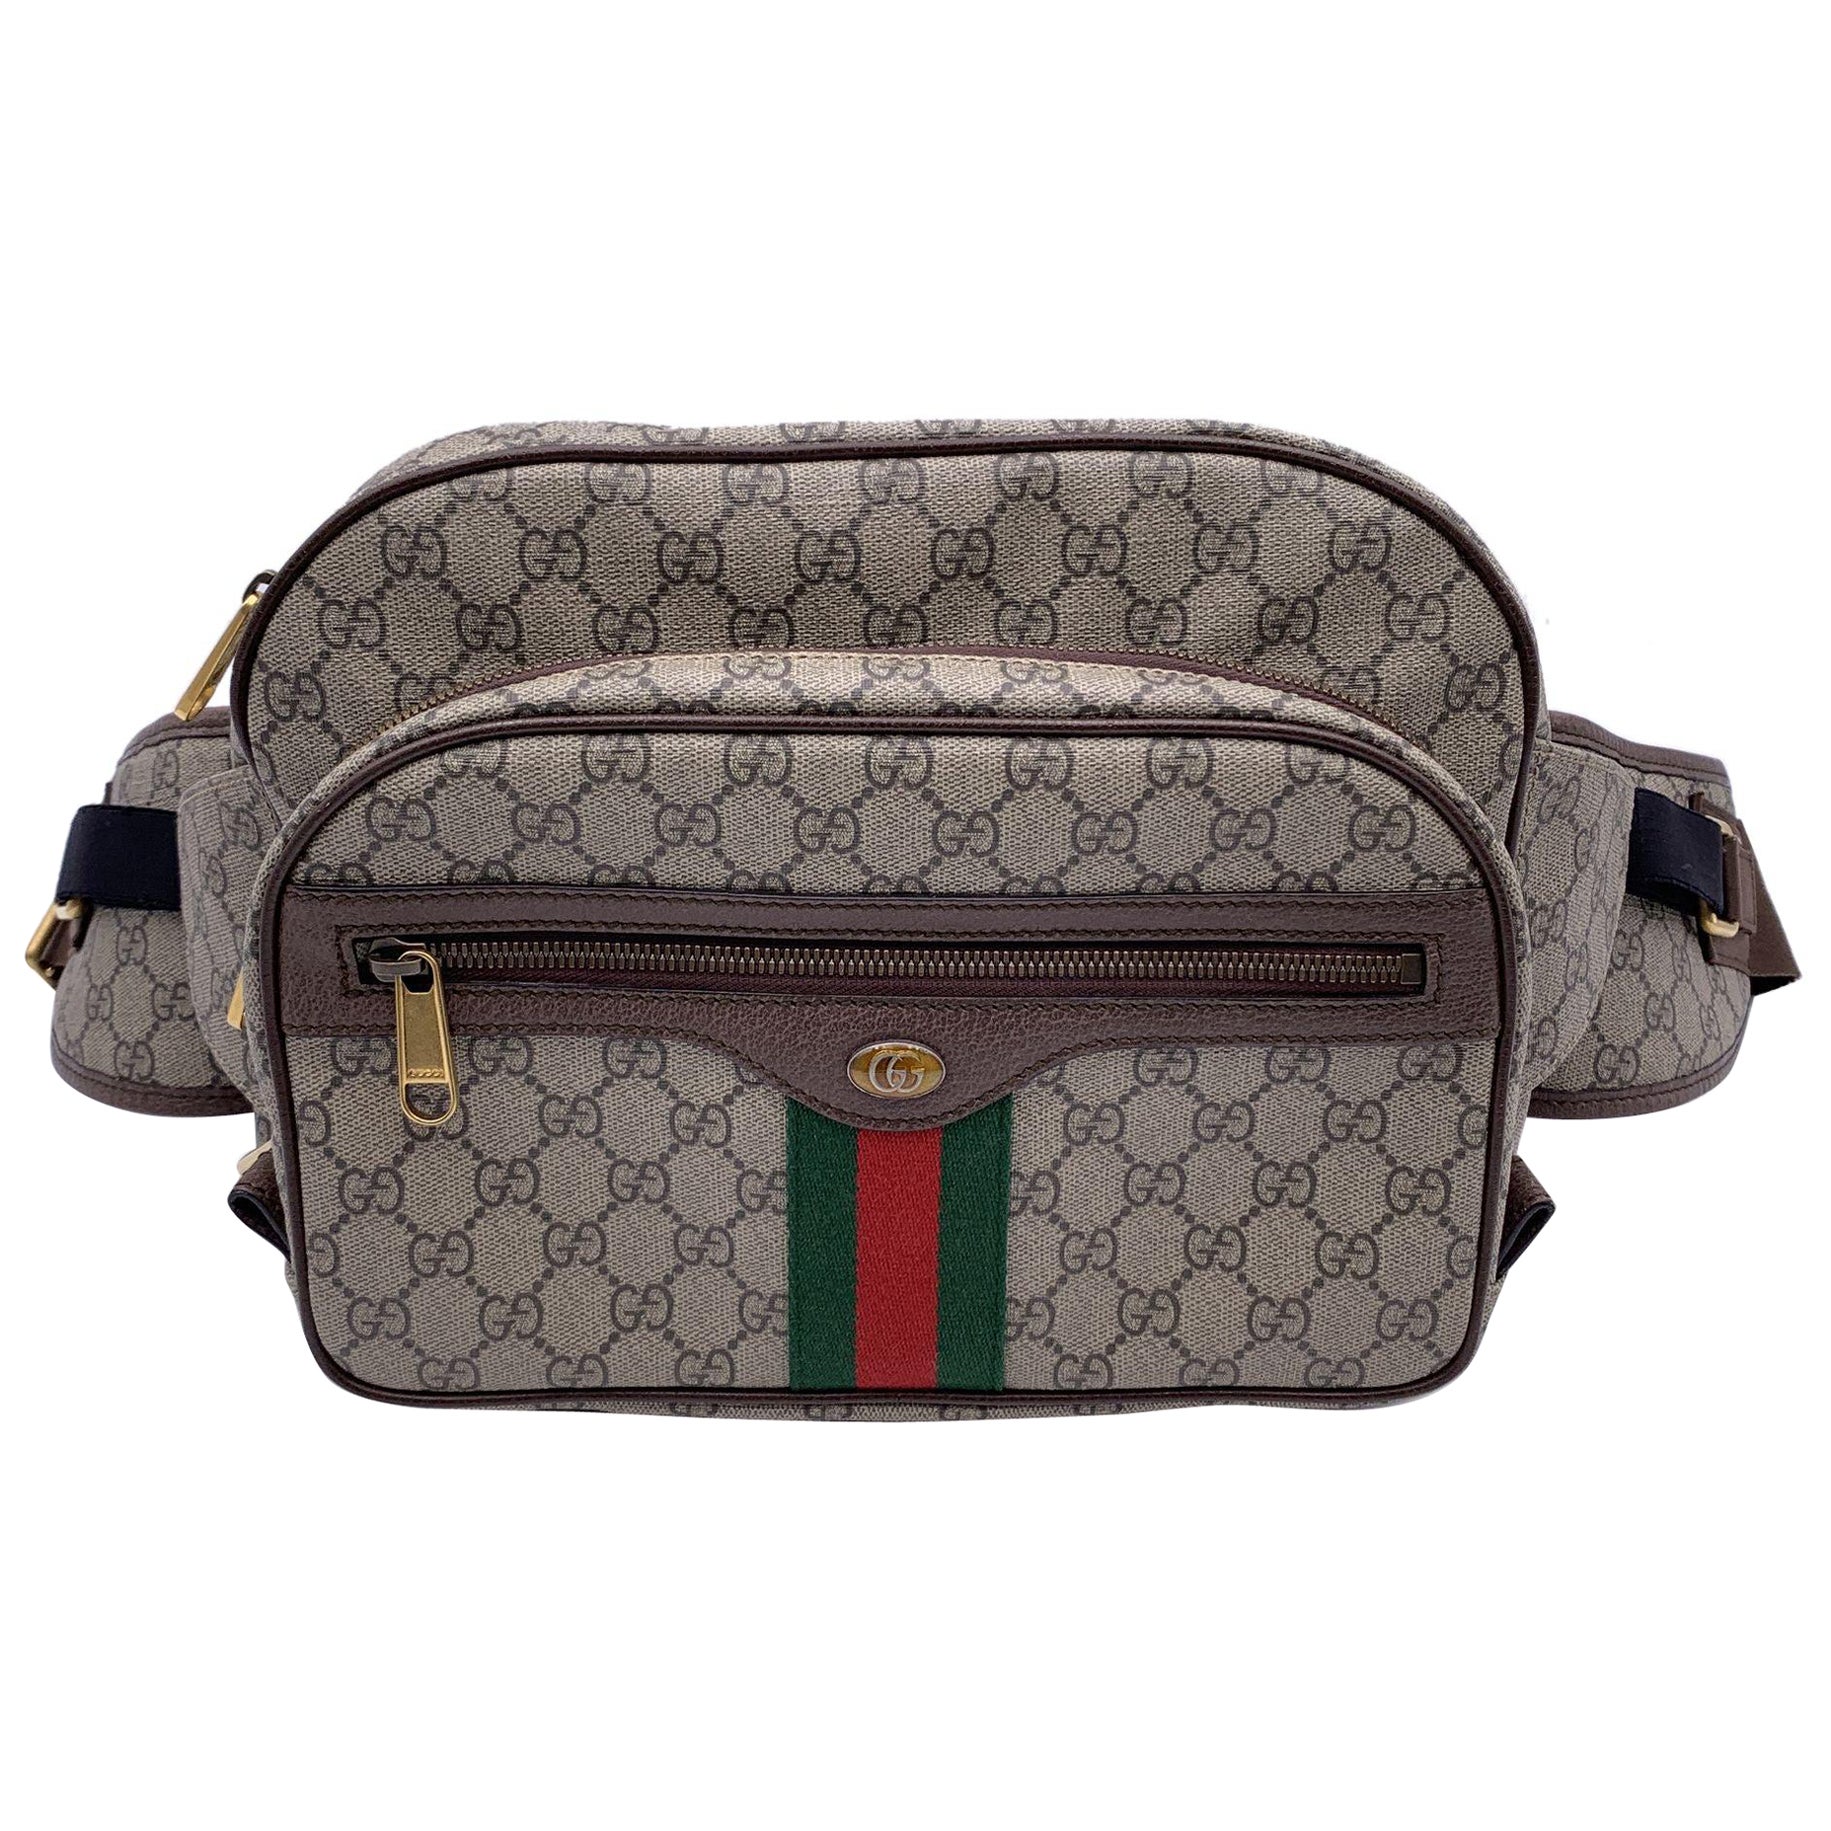 Gucci Beige GG Supreme Canvas Leather Ophidia Large Waist Bag For Sale